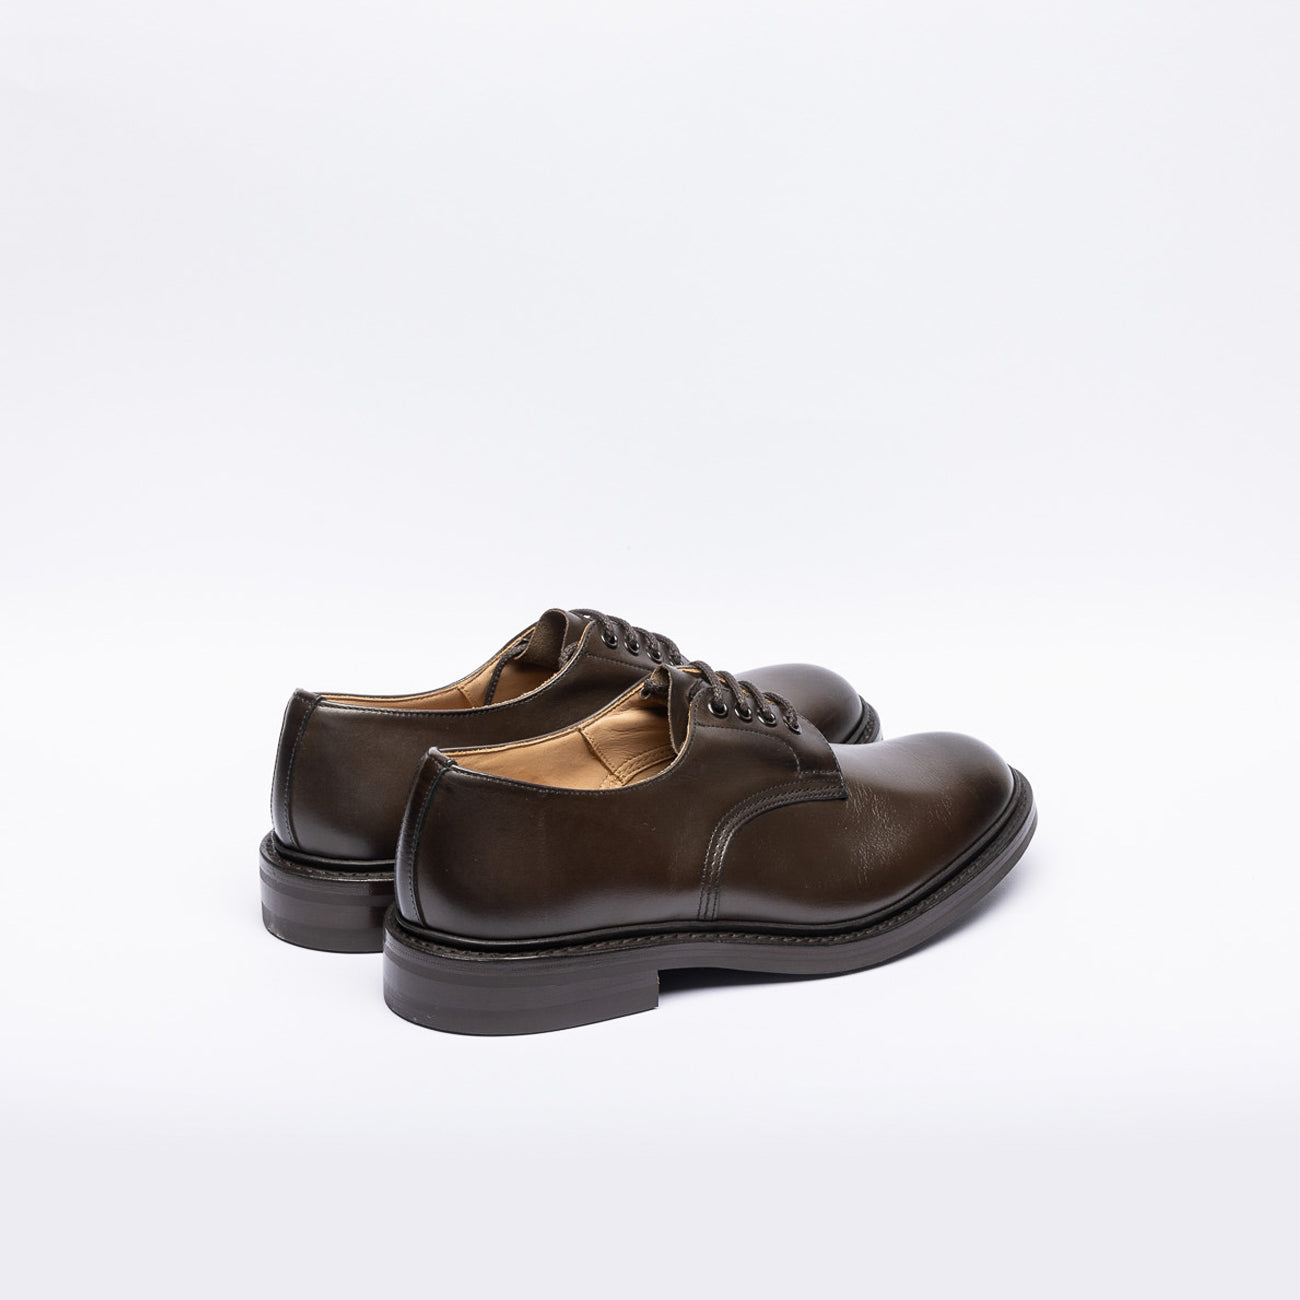 Tricker's Daniel derby lace-up in brown leather